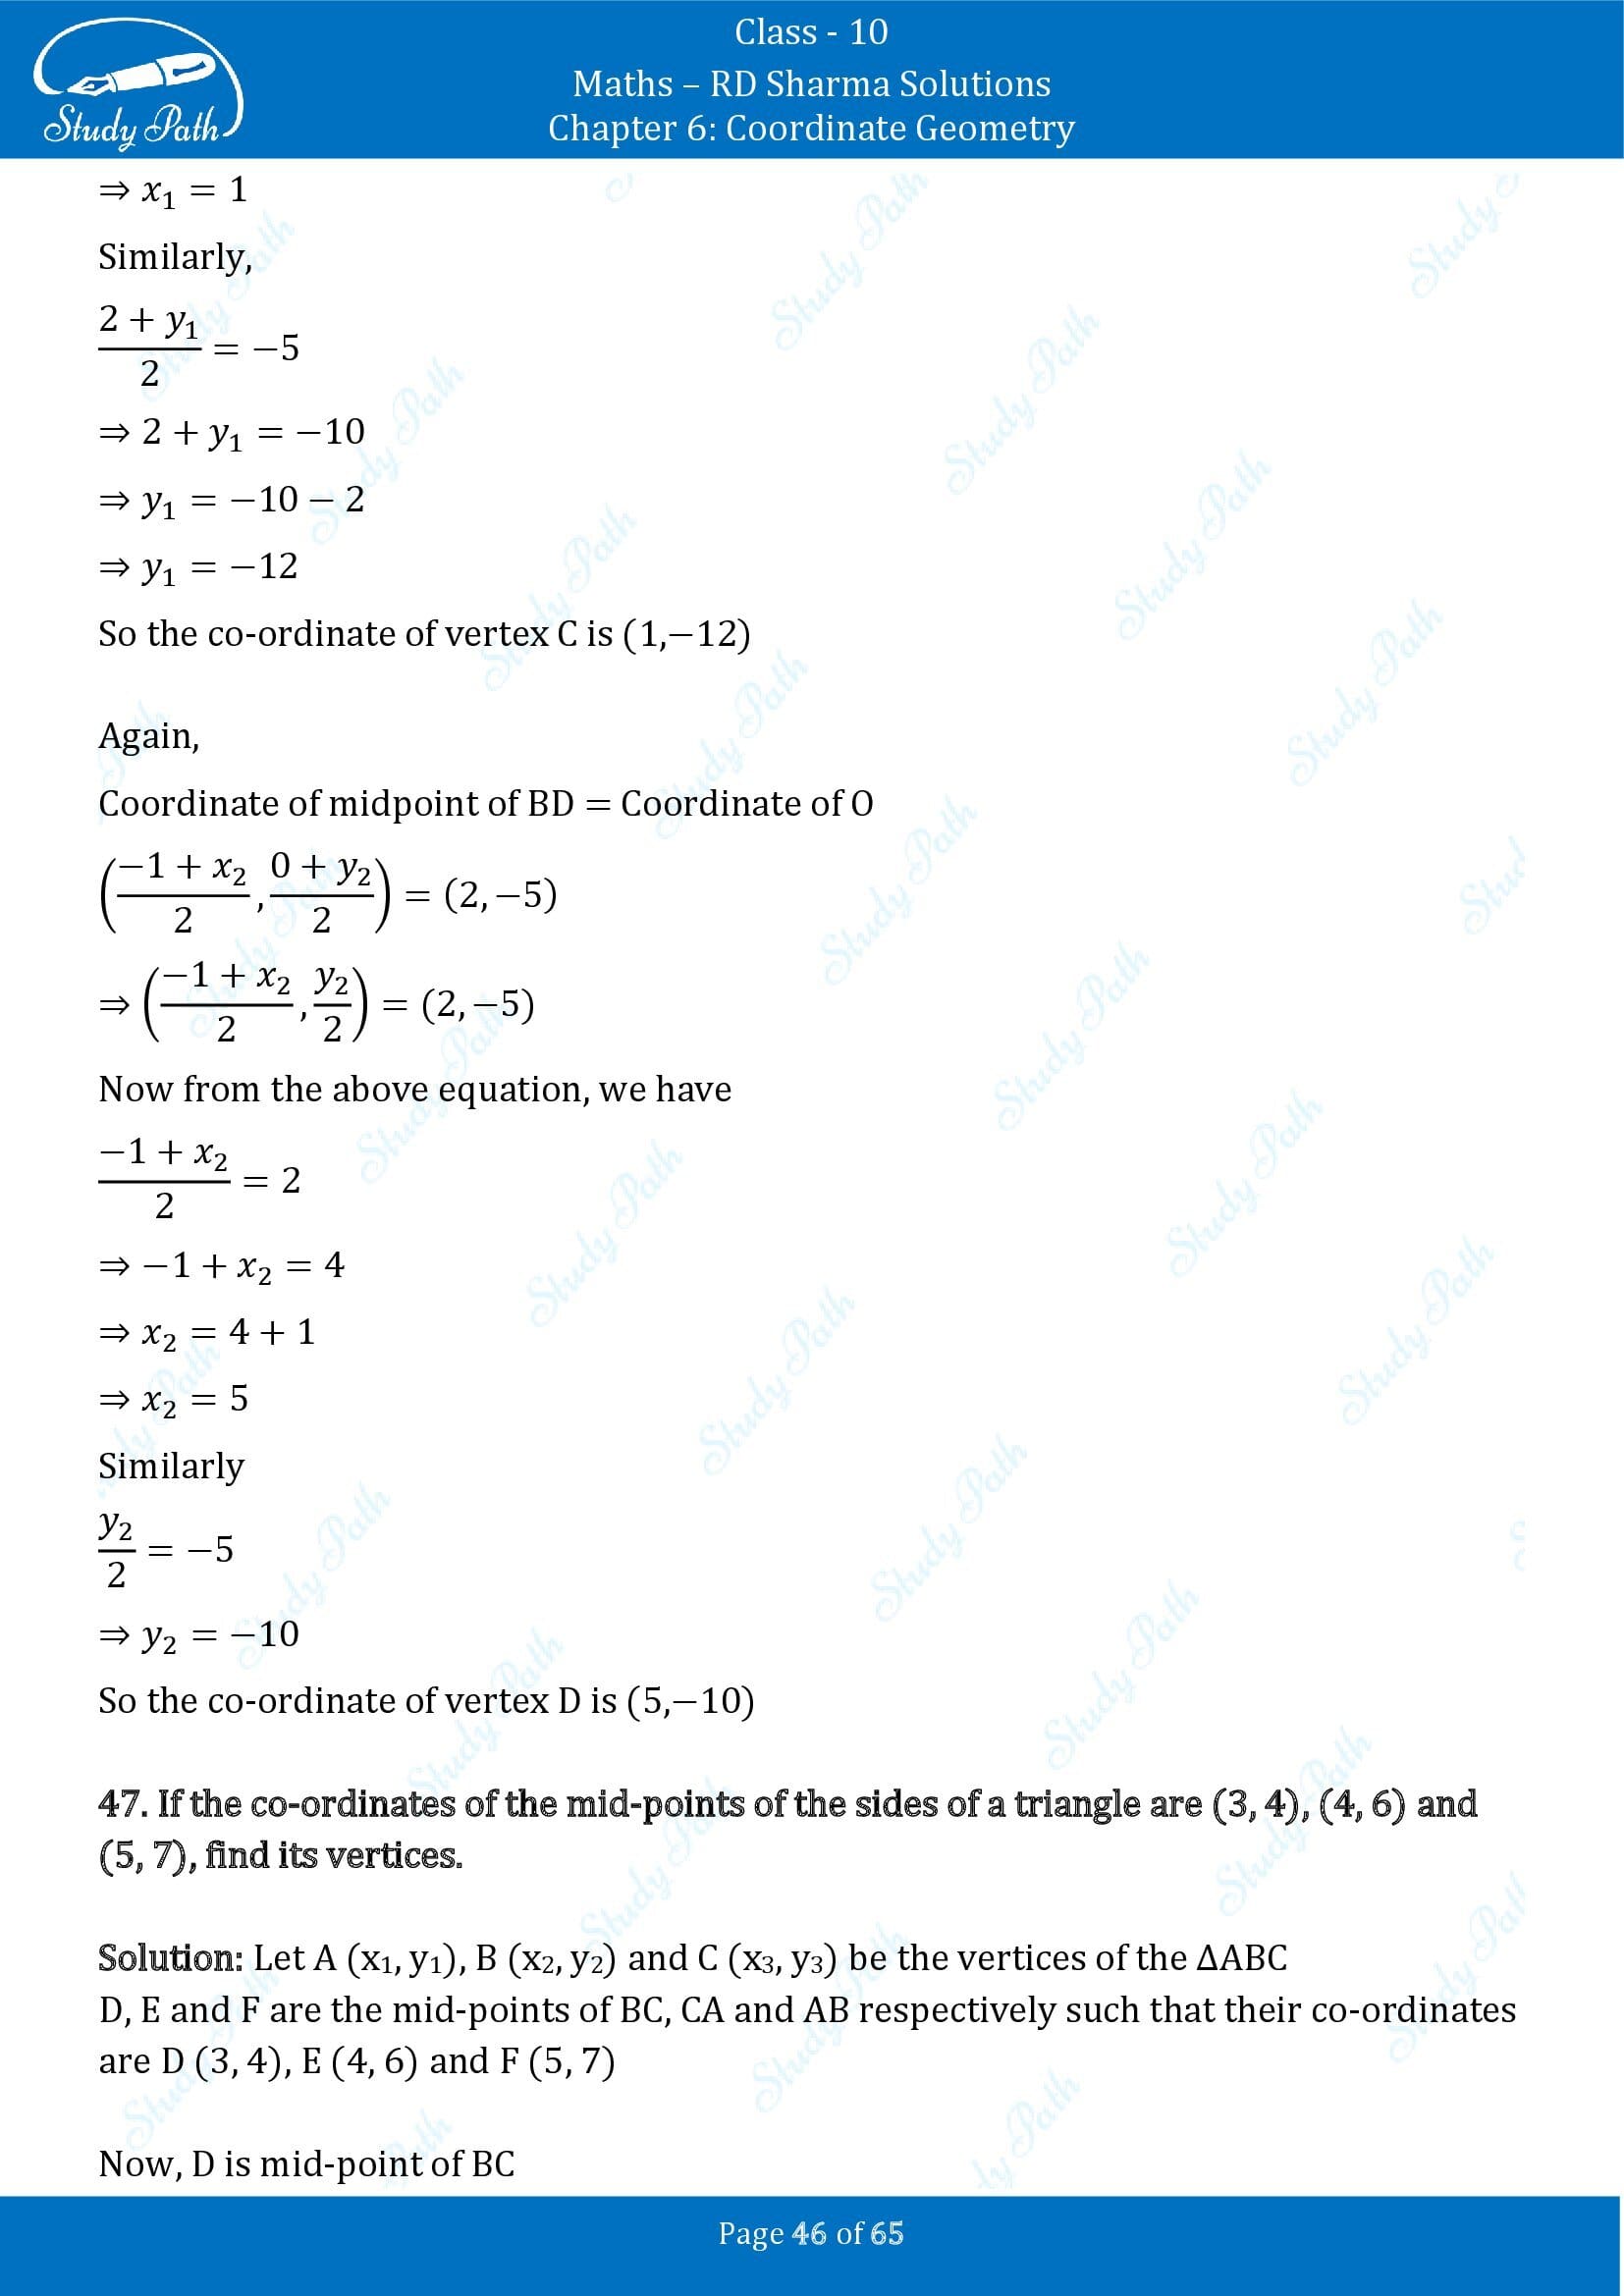 RD Sharma Solutions Class 10 Chapter 6 Coordinate Geometry Exercise 6.3 00046